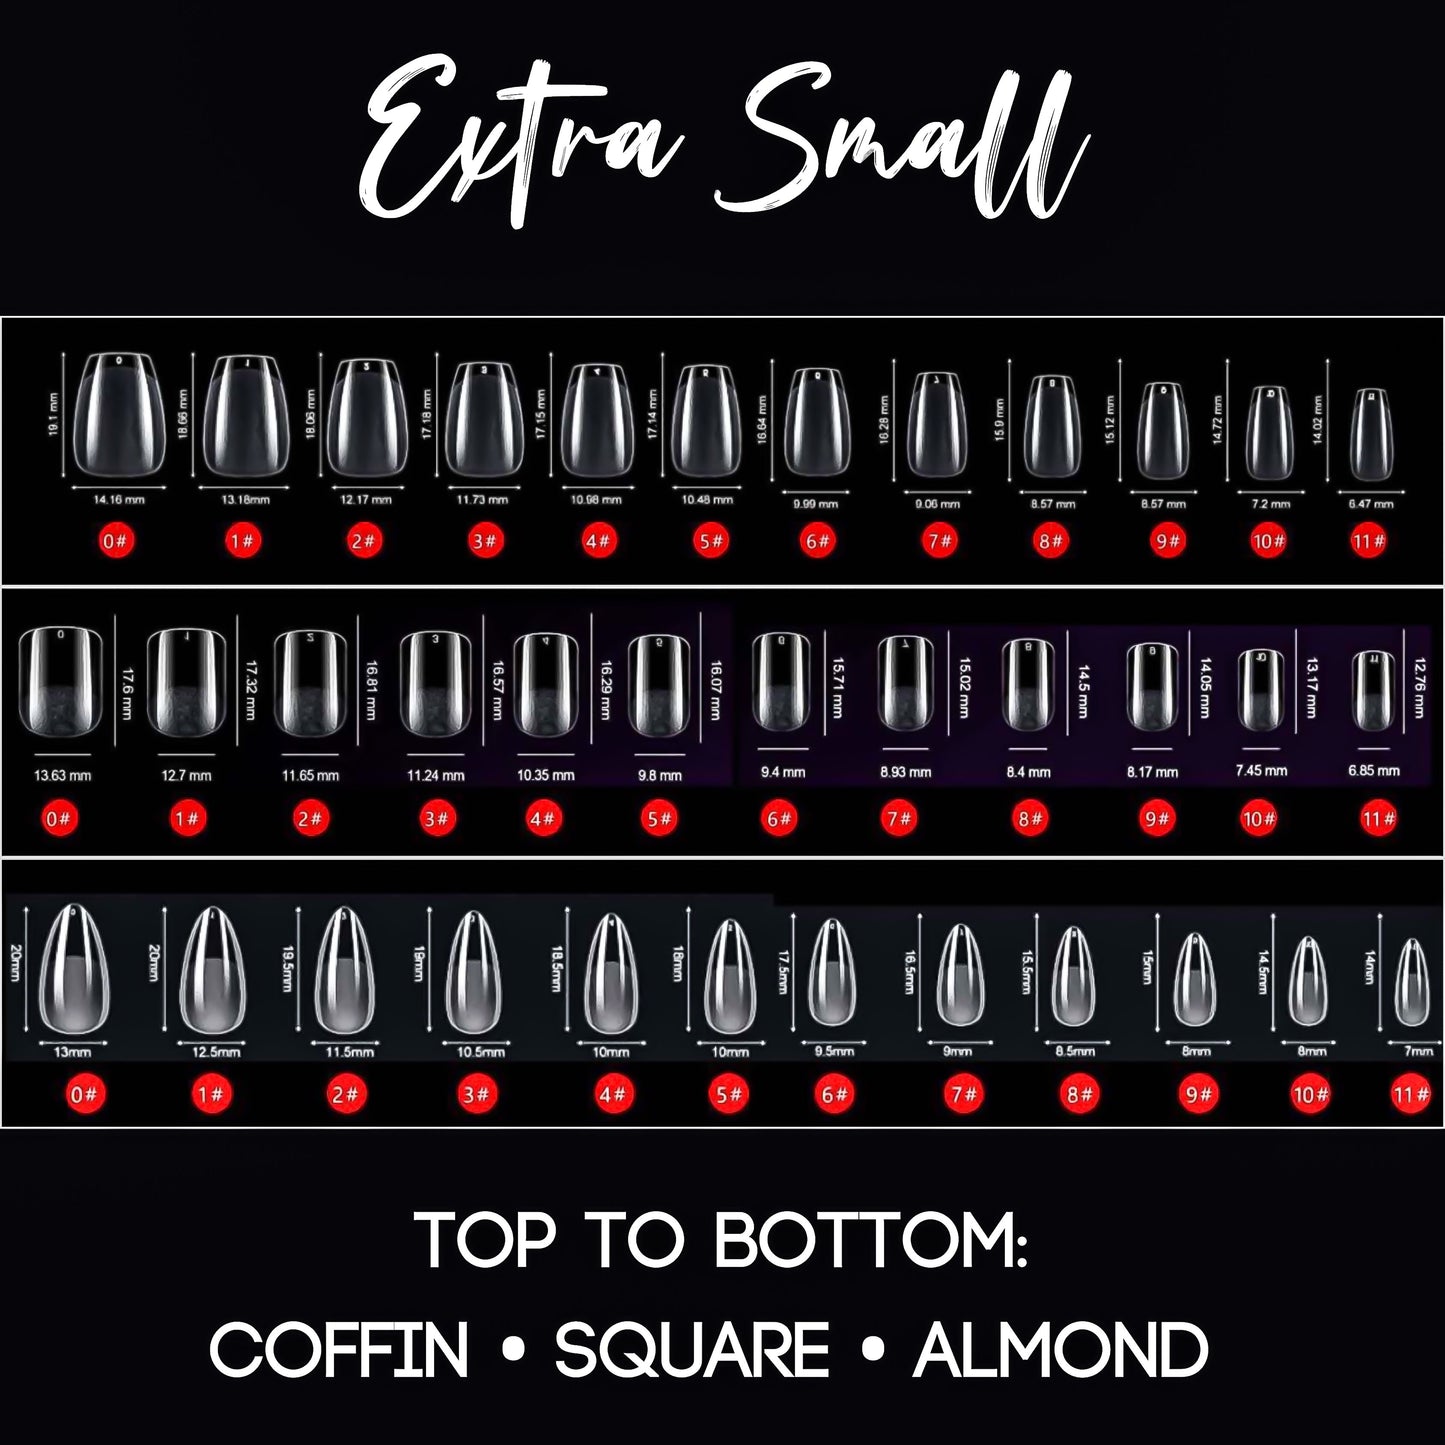 XS Coffin Full Coverage Nail Tips